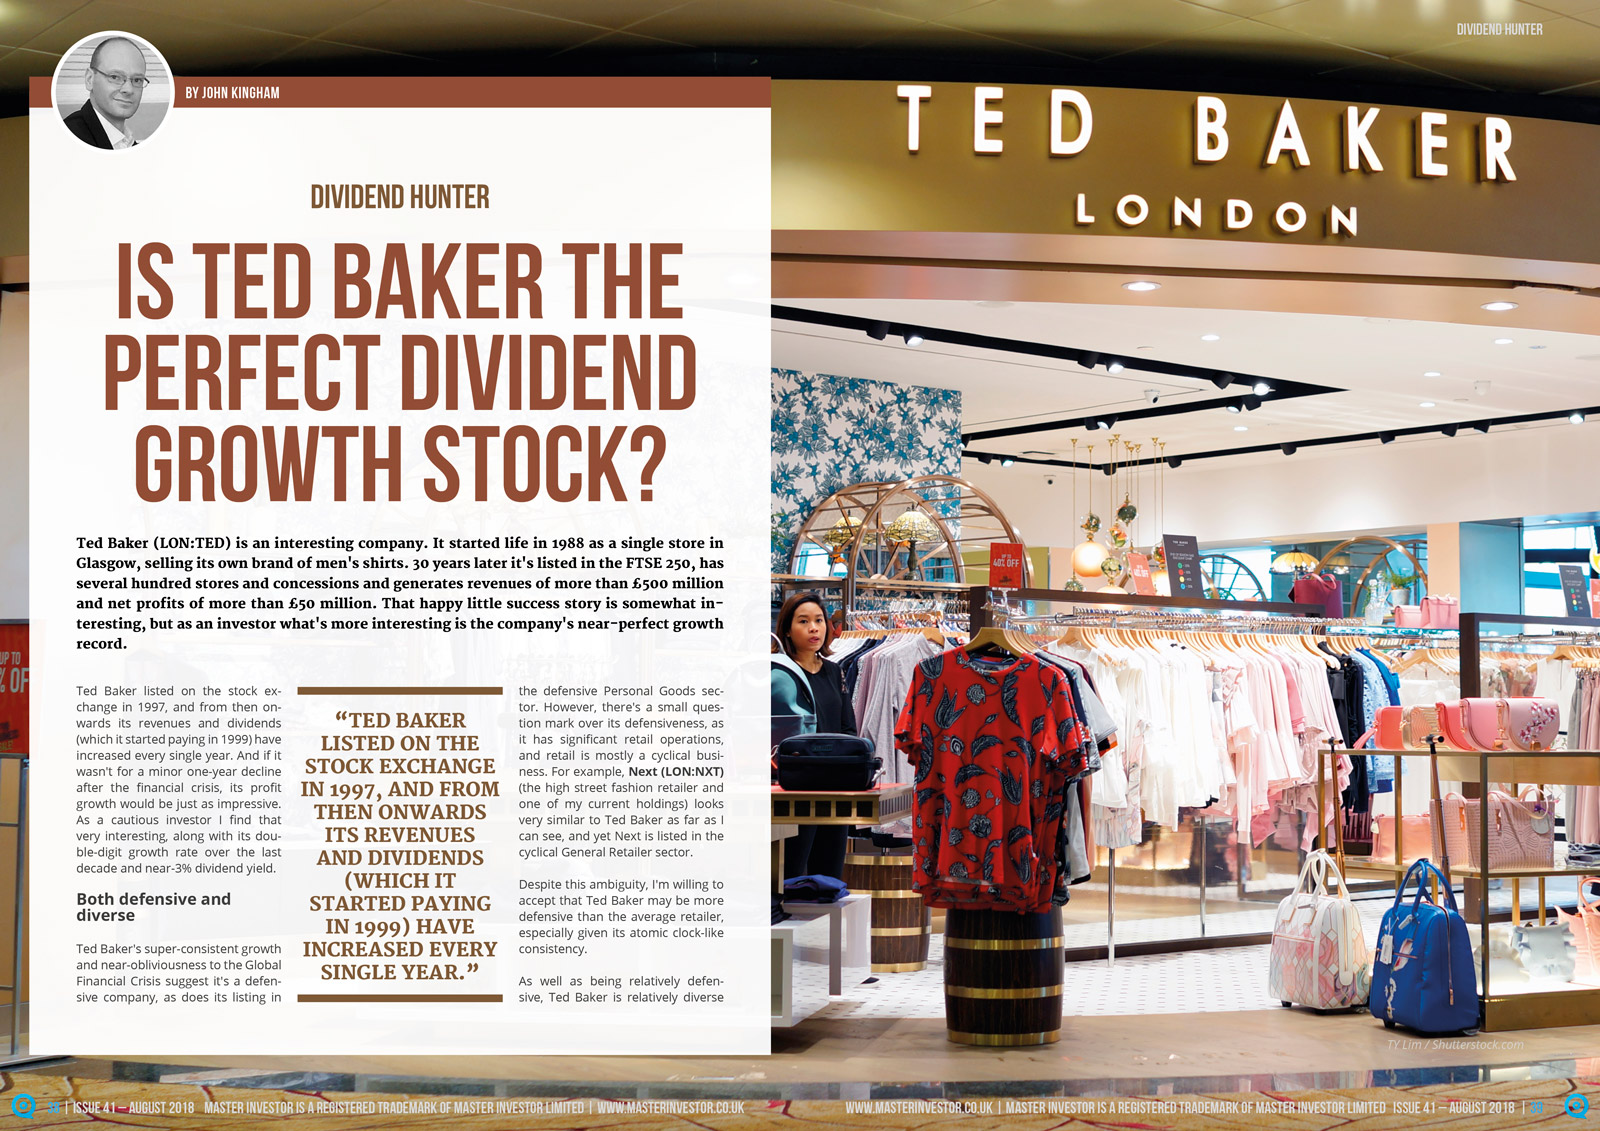 Is Ted Baker the perfect dividend growth stock?